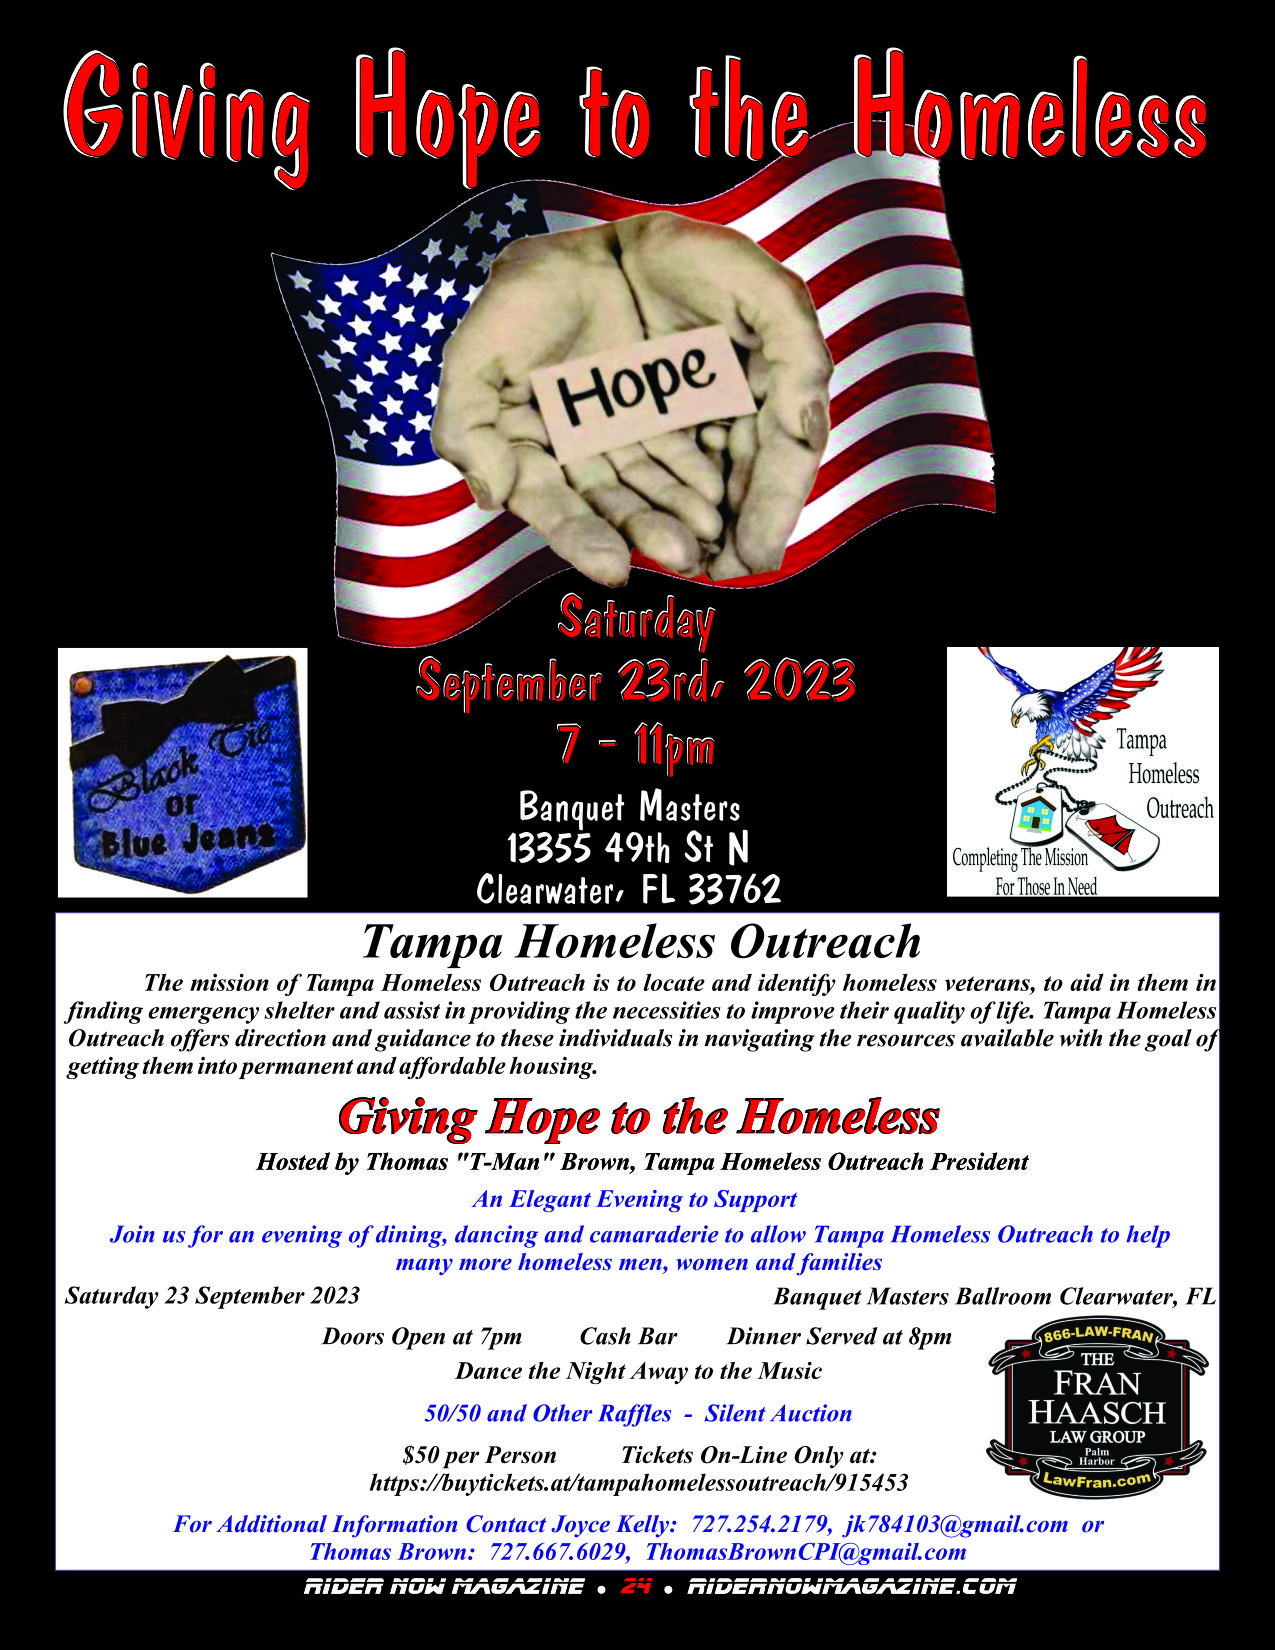 Giving Hope to the Homeless Evening Benefit